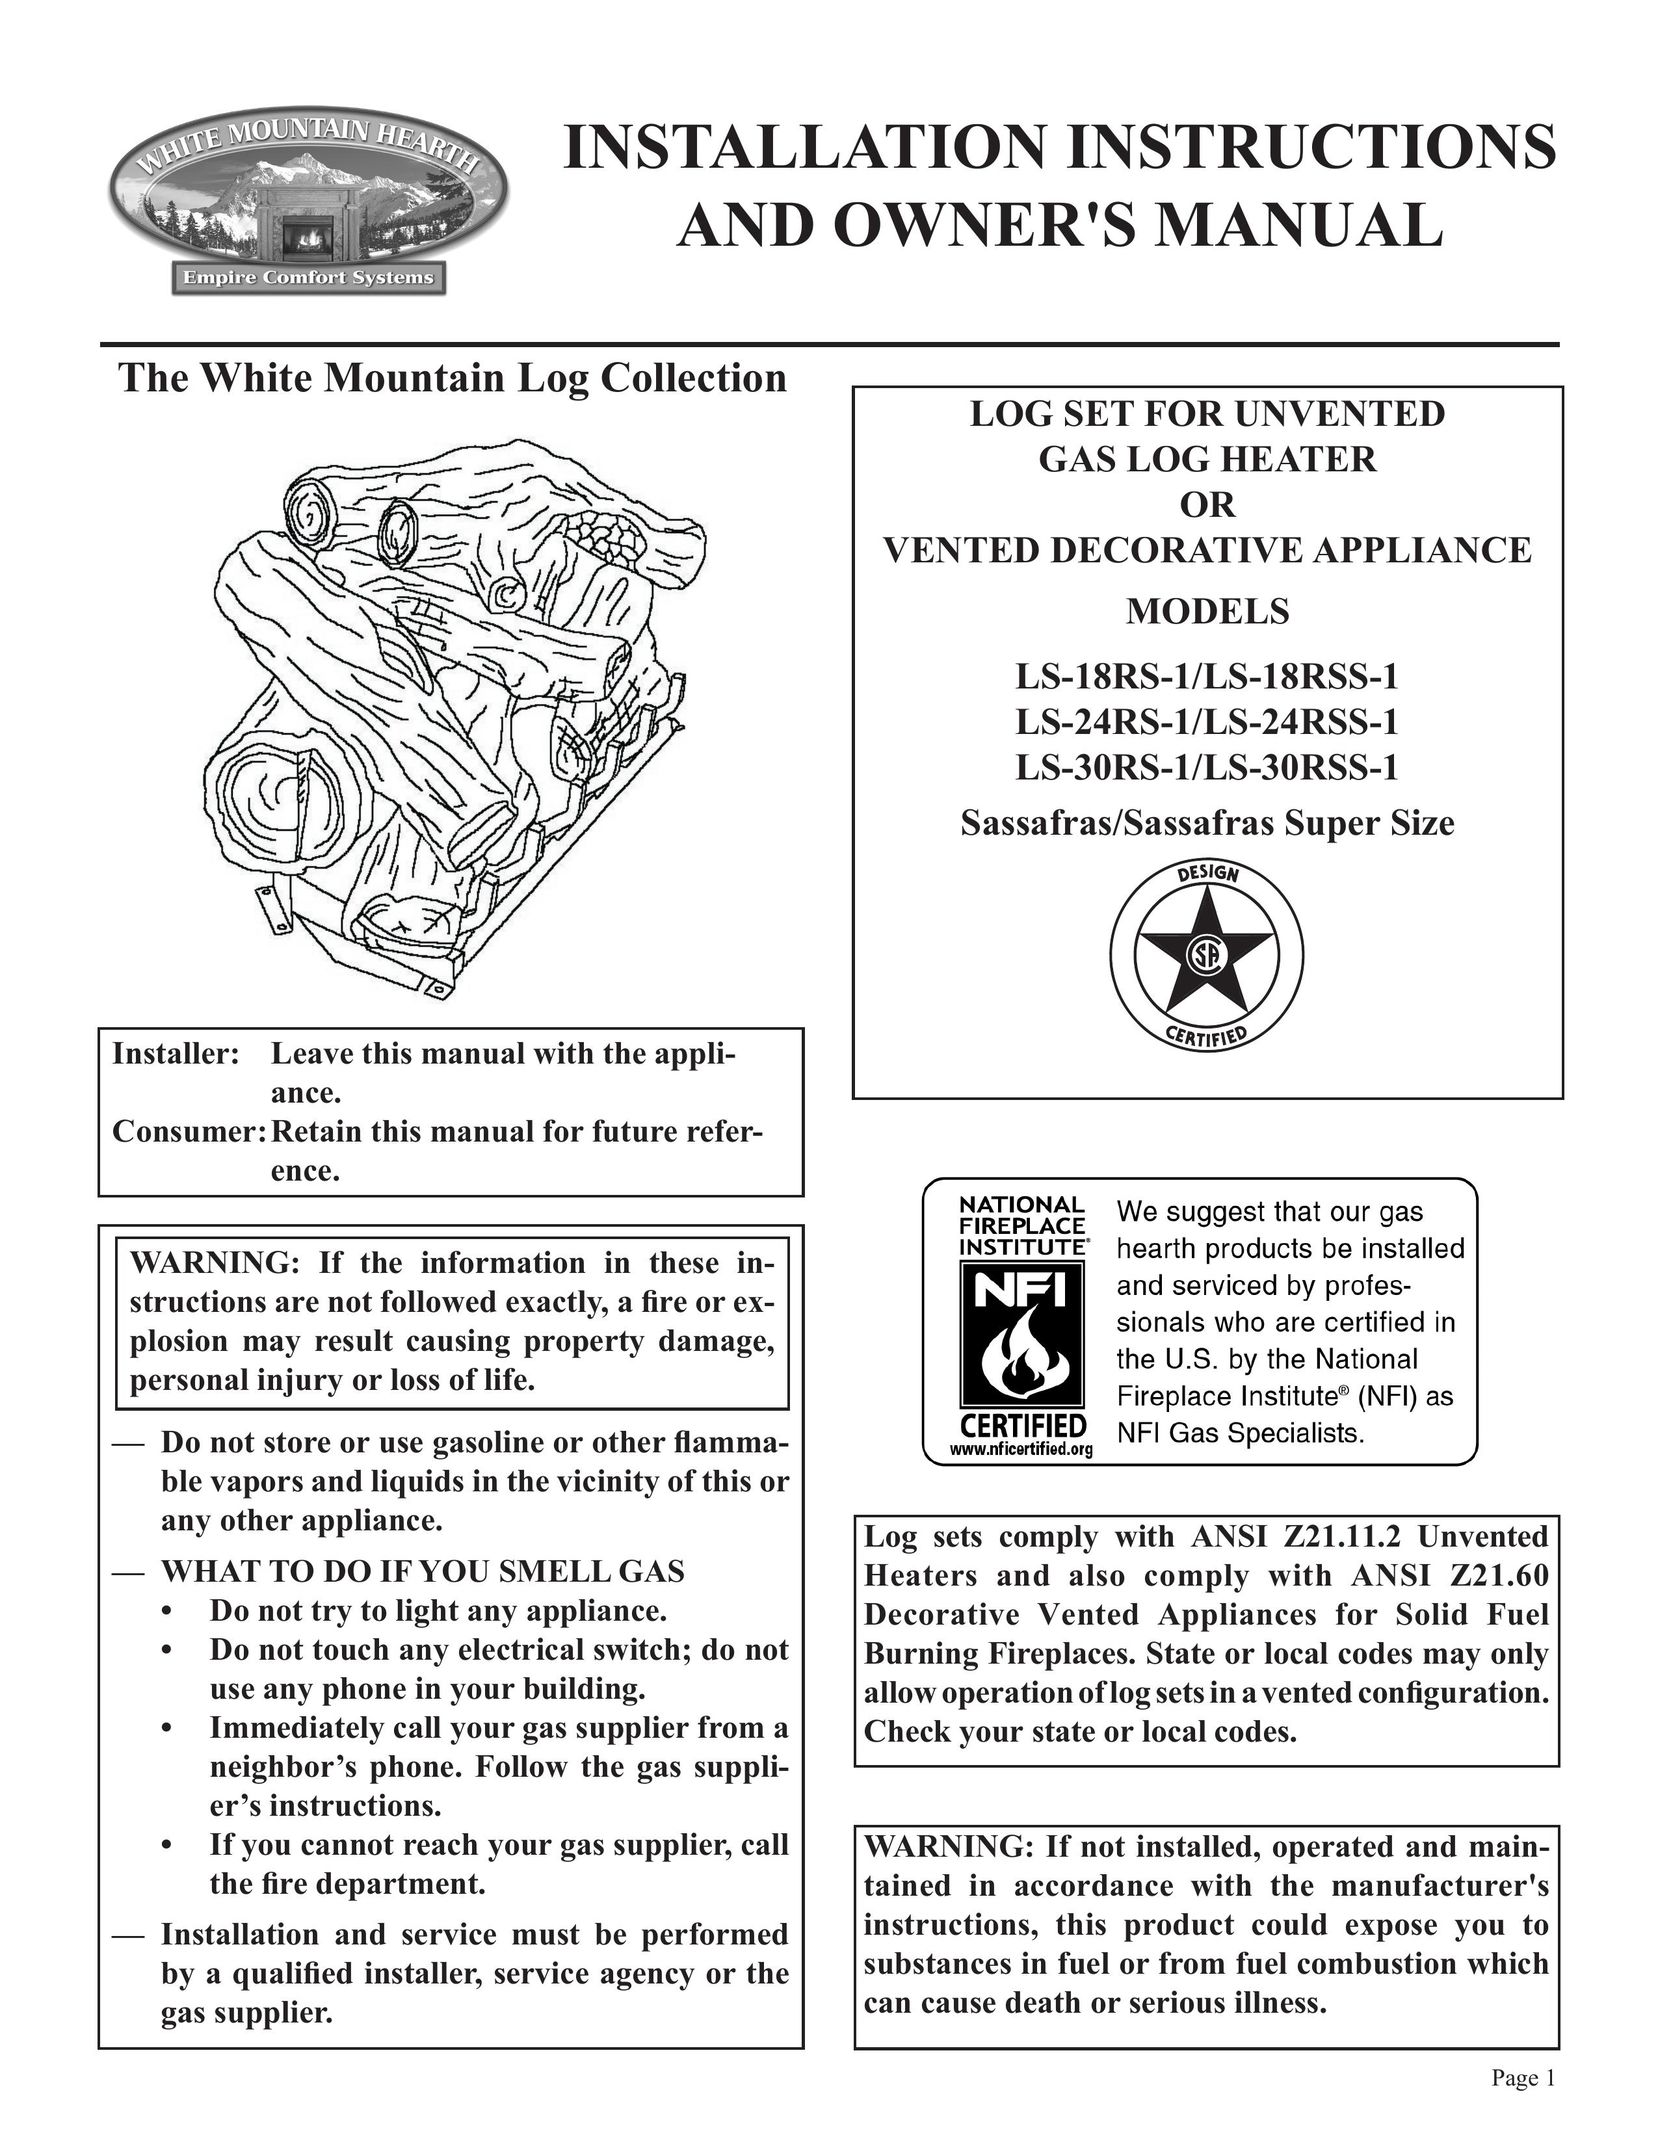 Empire Comfort Systems LS-24RSS-1 Gas Heater User Manual